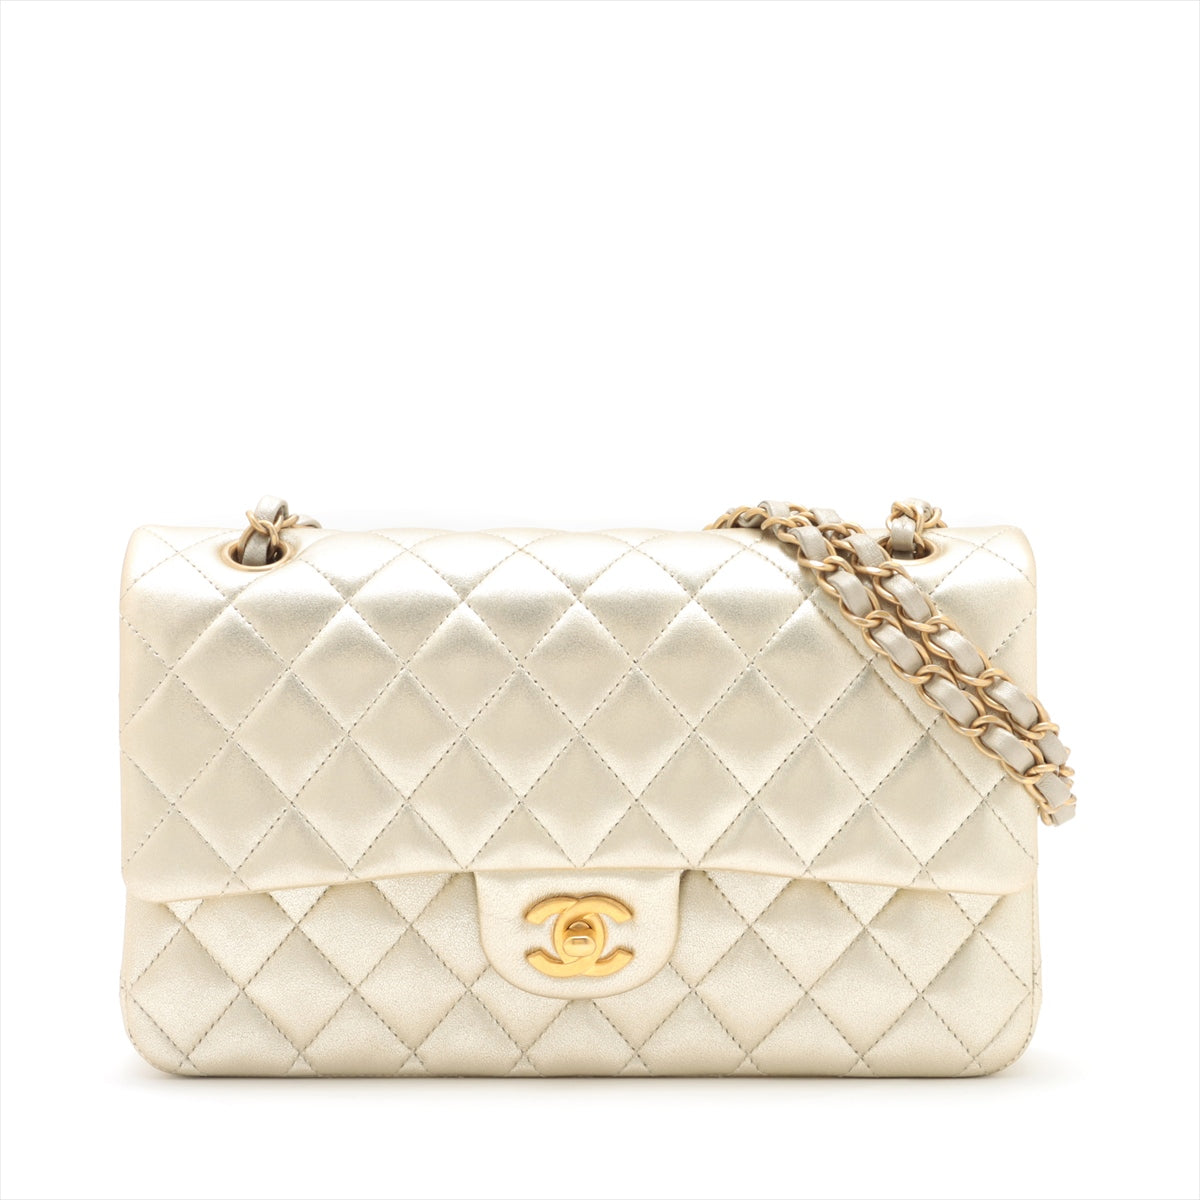 Chanel Matelasse Ram leather Double flap Double chain bag Gold Gold Metal fittings There is an IC chip